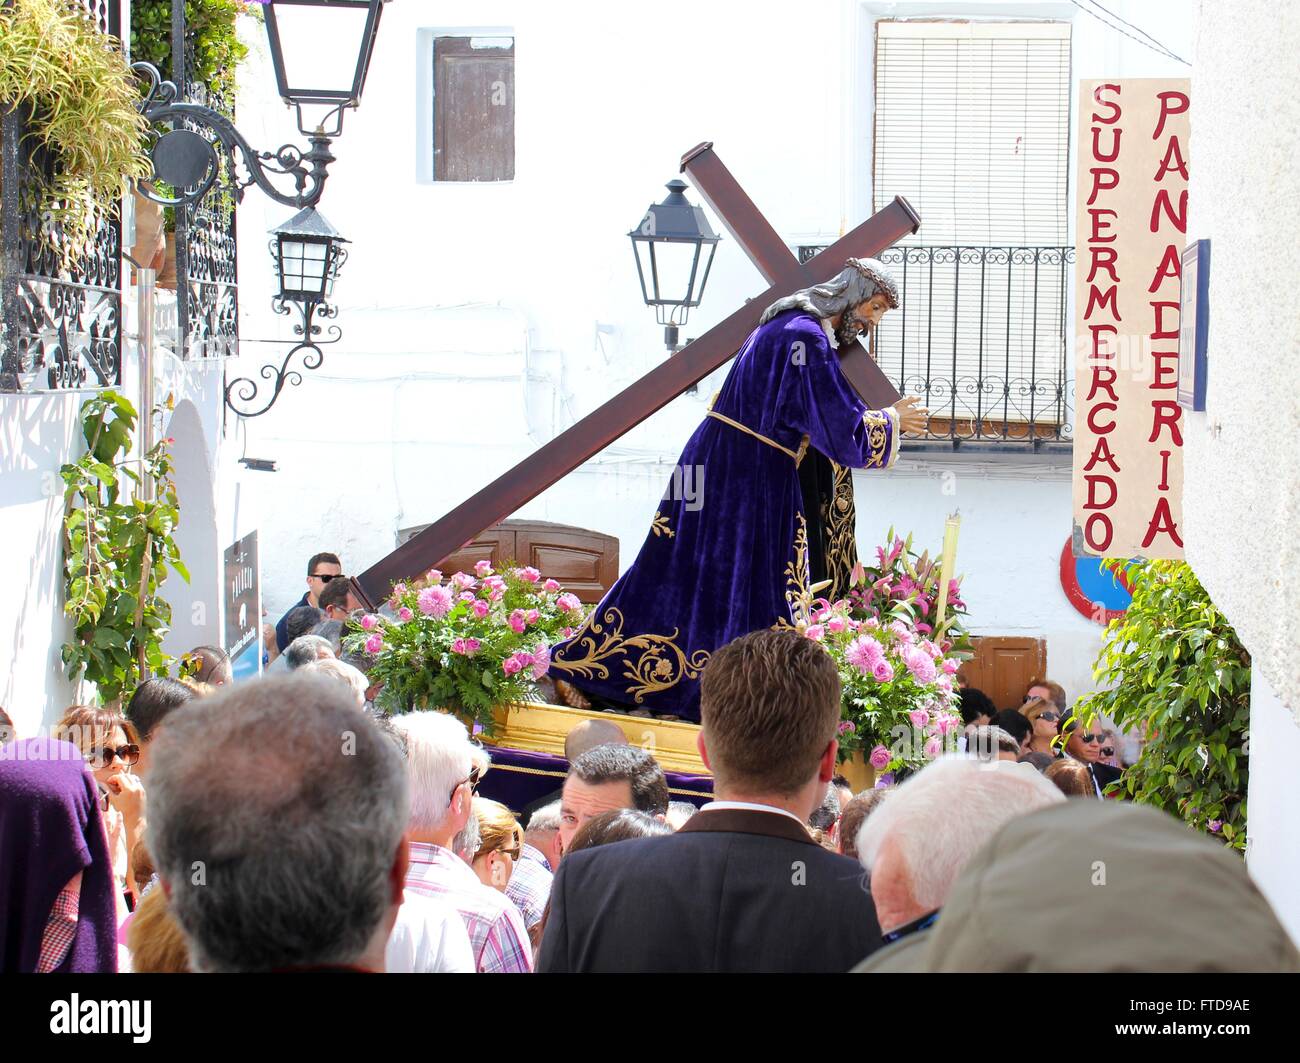 The Good Friday procession follows Jesus and the Cross through the streets of Mojacar, Spain in Holy Week Stock Photo